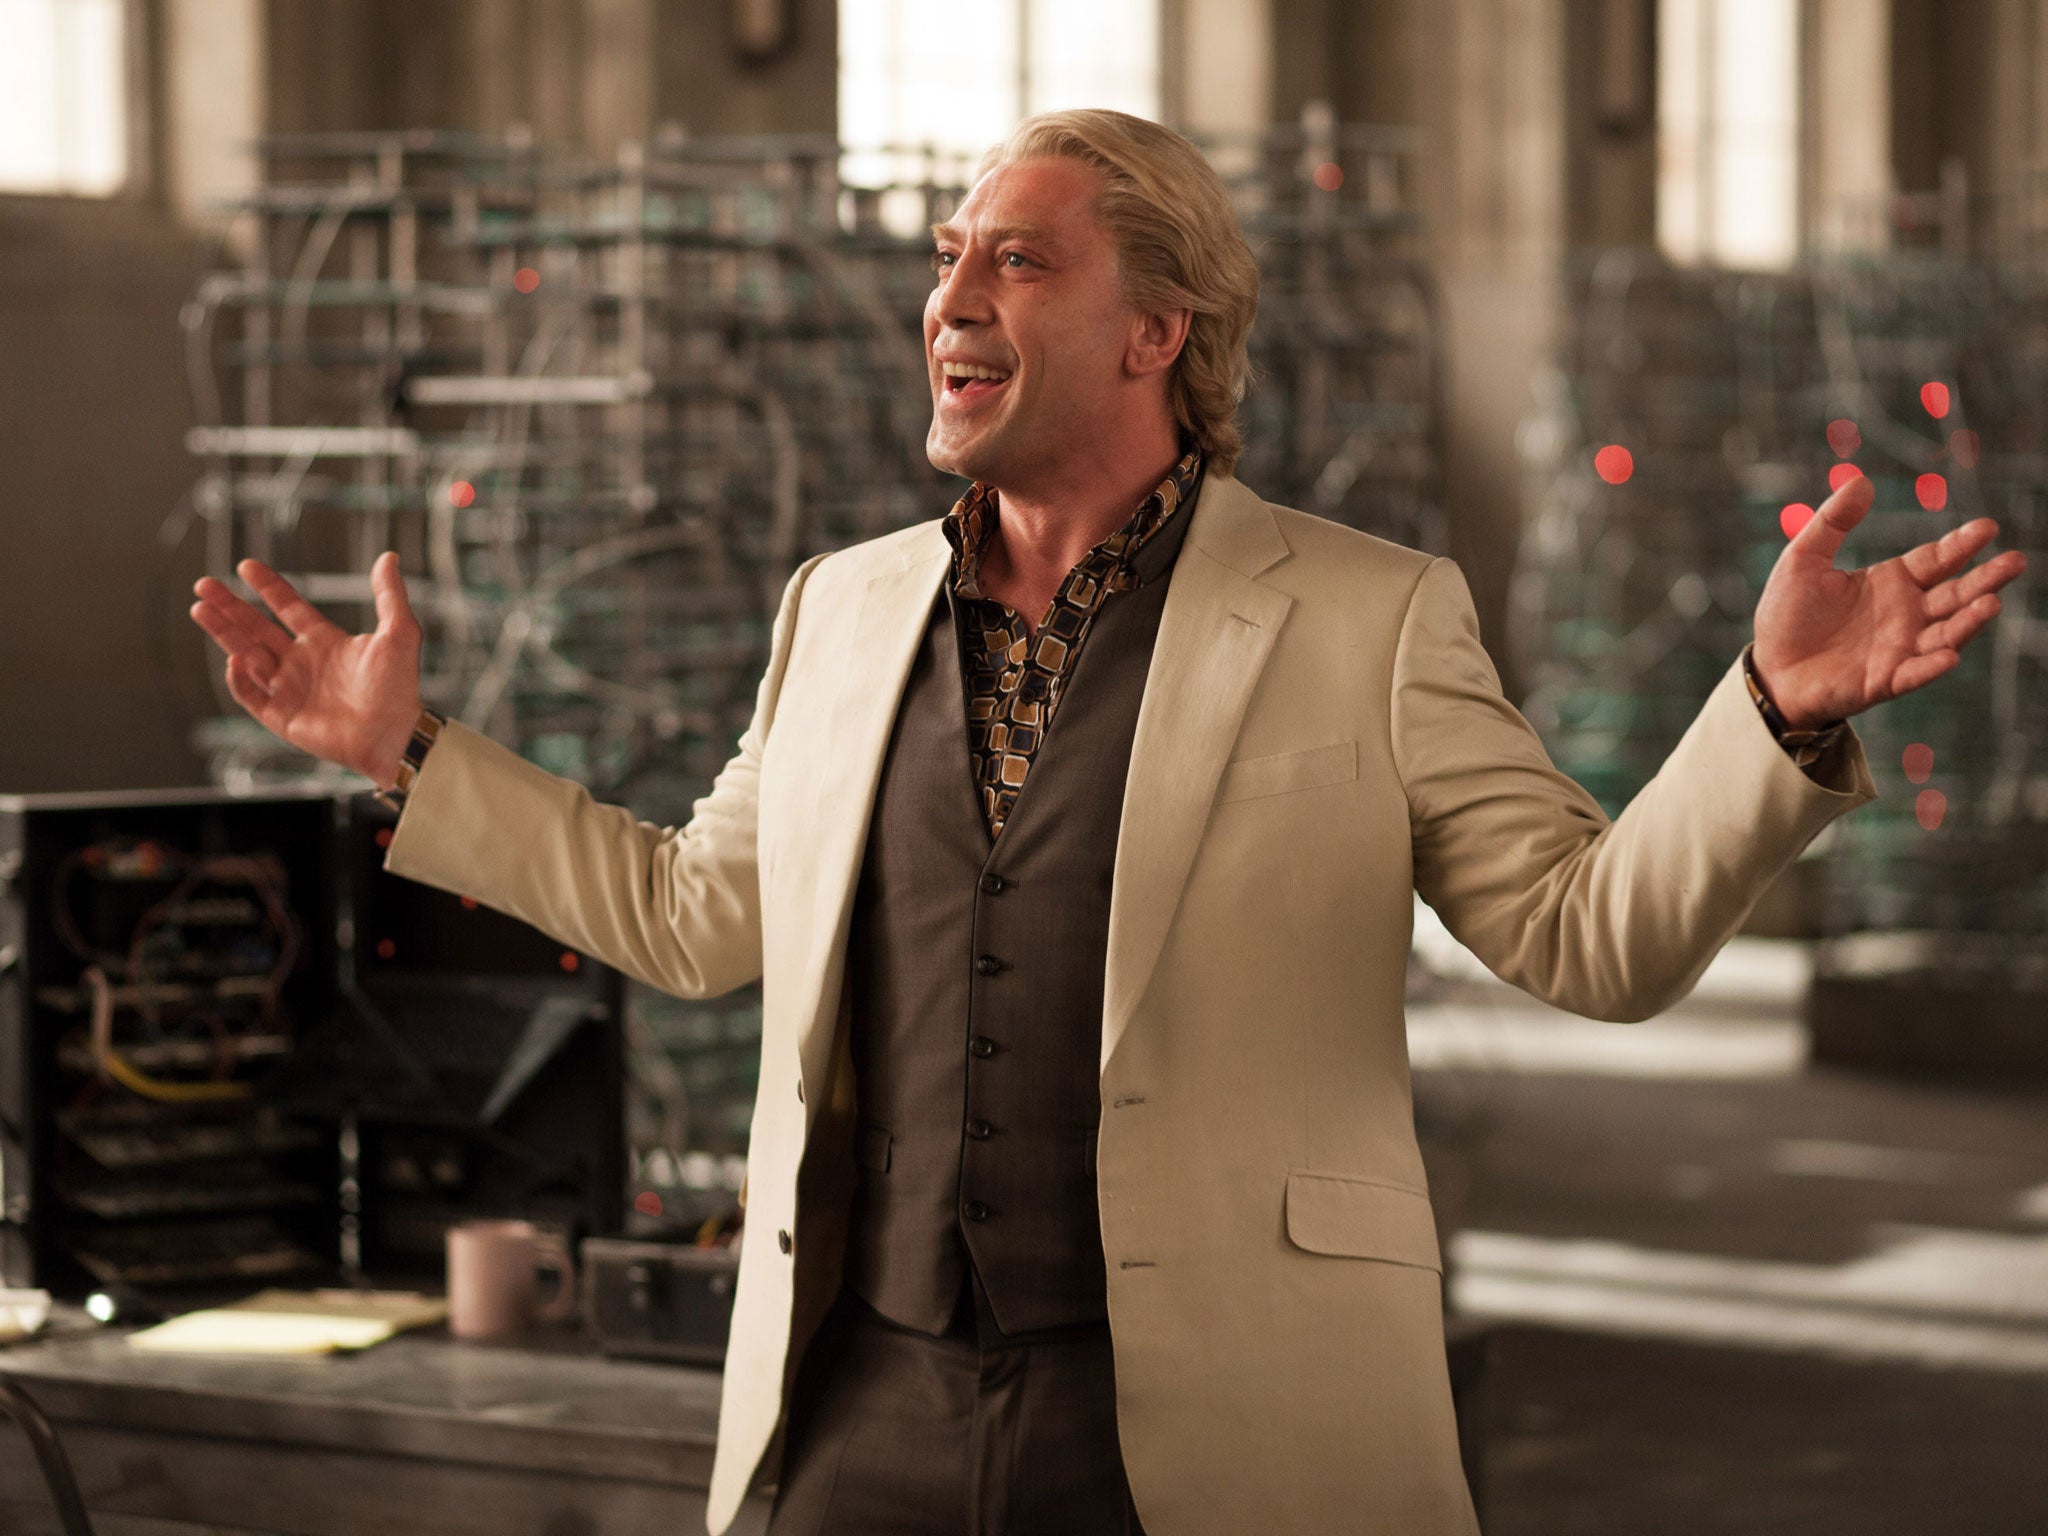 Glaad complained that some appearances were not necessarily positive such as Javier Bardem's villain Silva in Skyfall